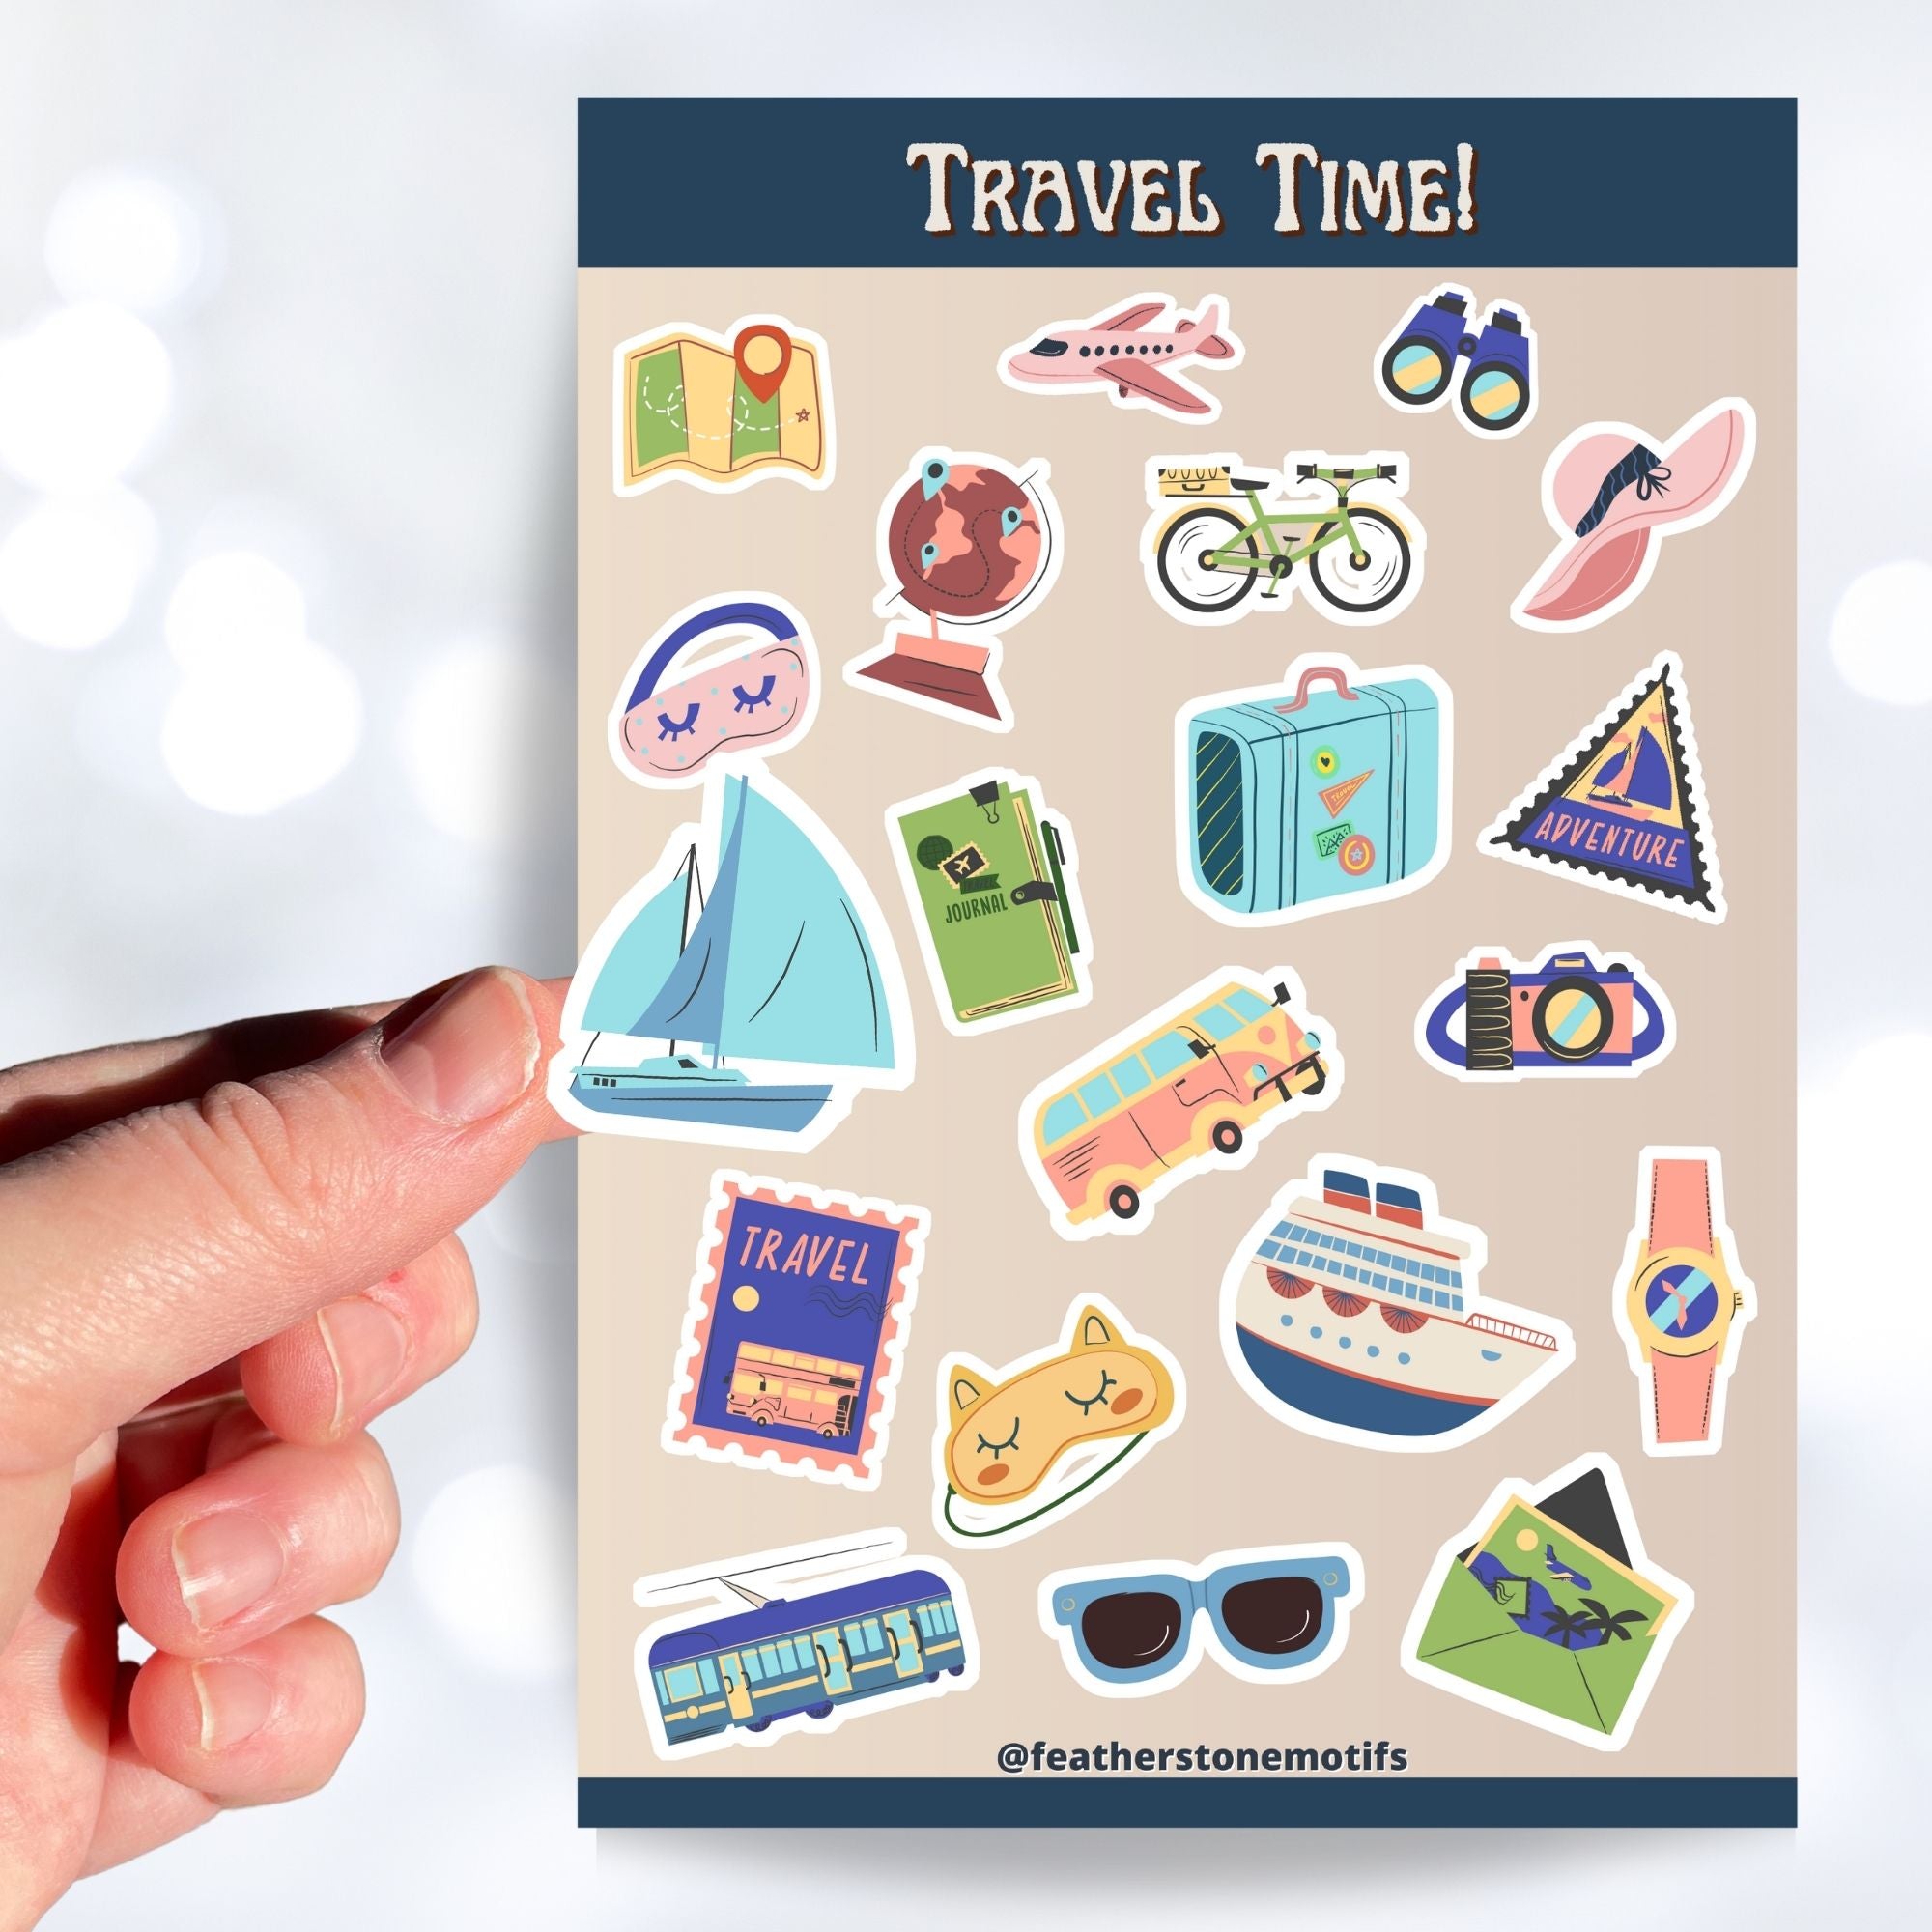 Pack your bags and grab your passport; it's travel time! This sticker sheet is filled with travel related sticker images sure to please even the most discerning traveler. Some of the sticker images are an airplane, suitcase, globe, and ship.  This image is of a hand holding a sailboat sticker above the sticker sheet.